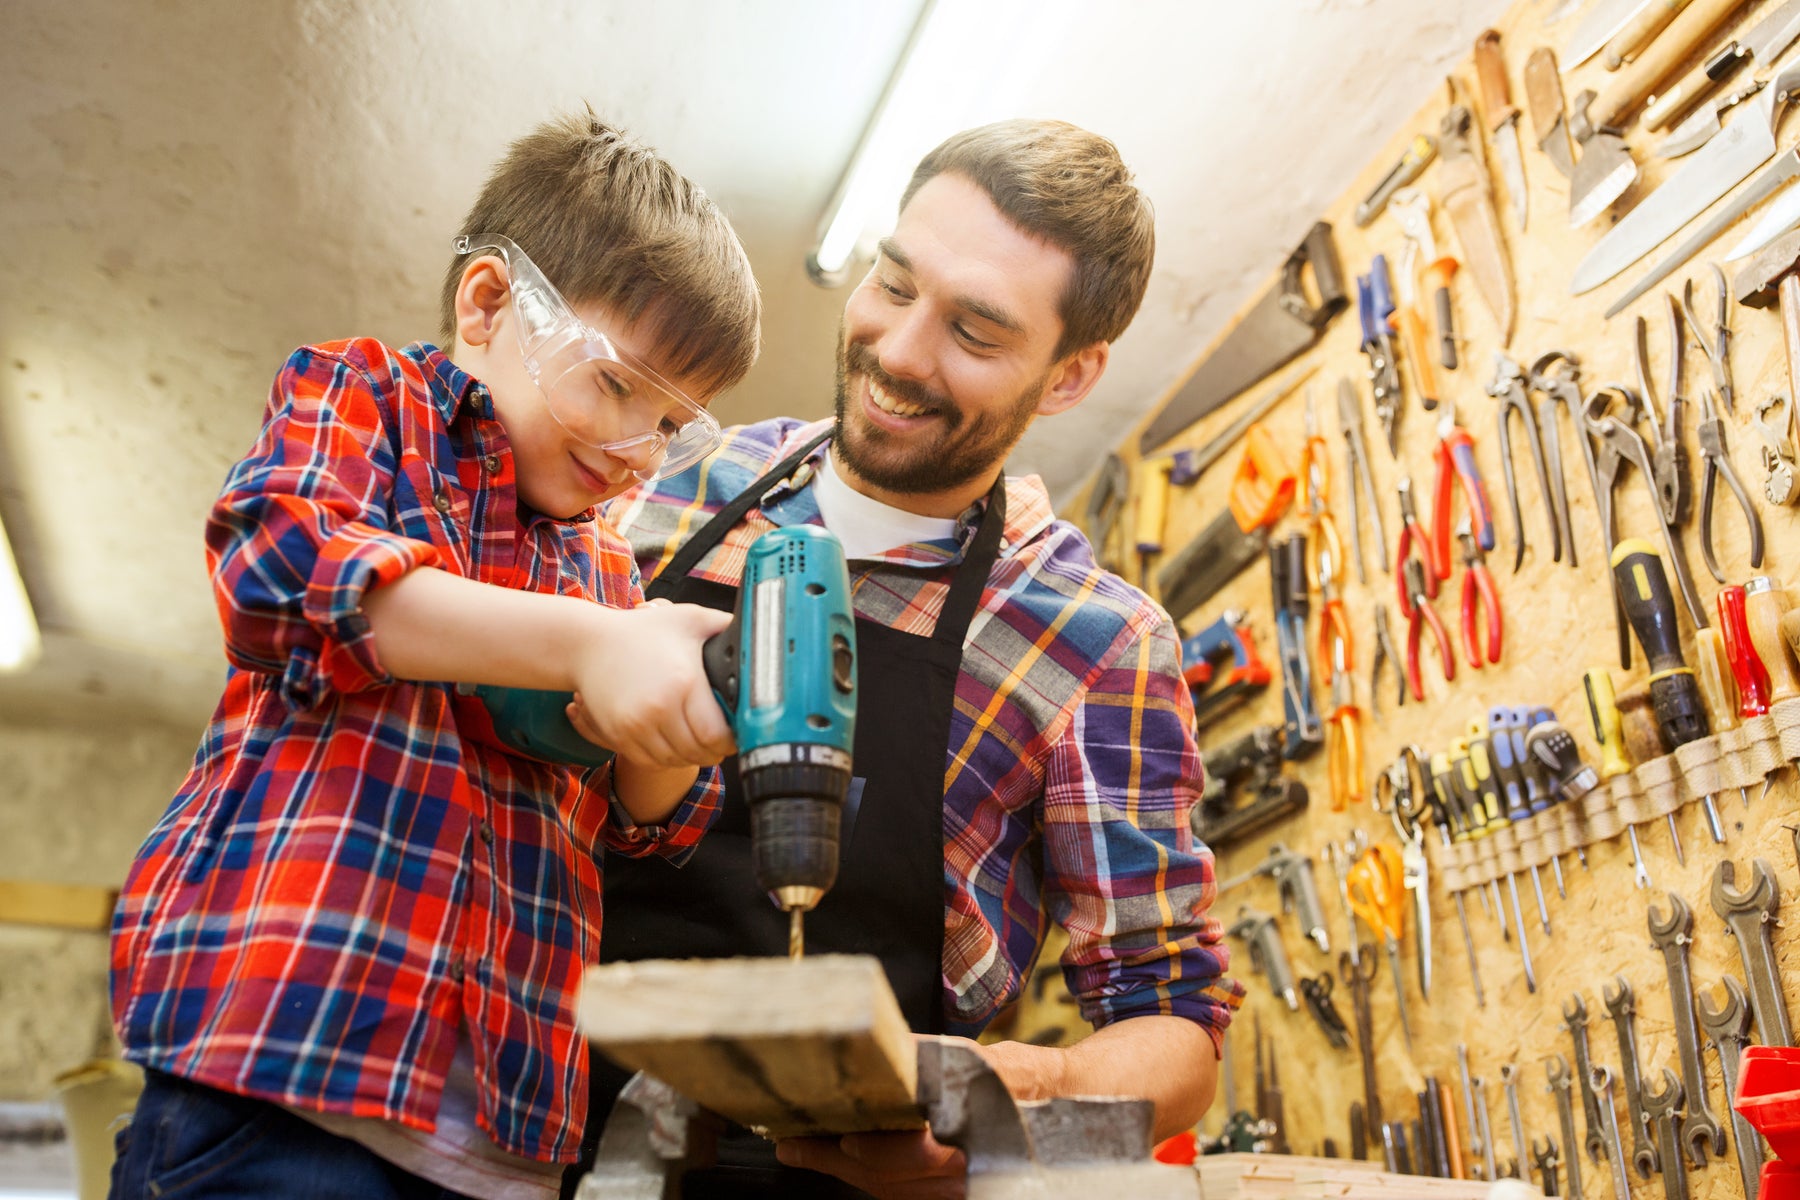 Why Children Should Learn to Use Hand & Power Tools